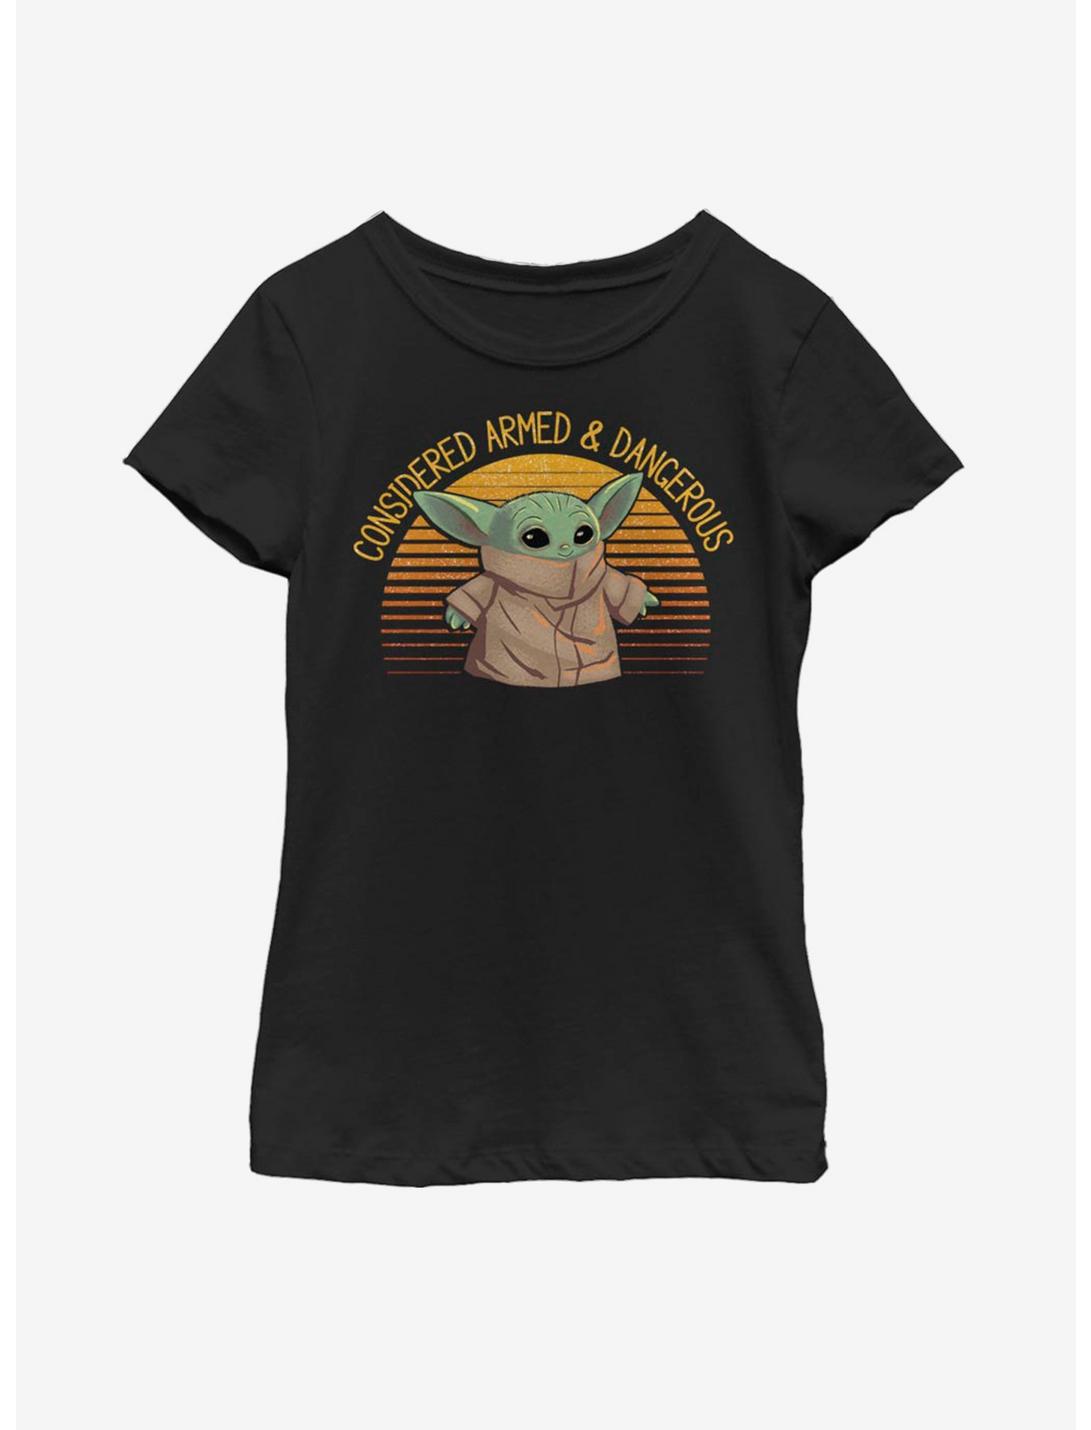 Star Wars The Mandalorian The Child Sunset Armed And Dangerous Youth Girls T-Shirt, BLACK, hi-res